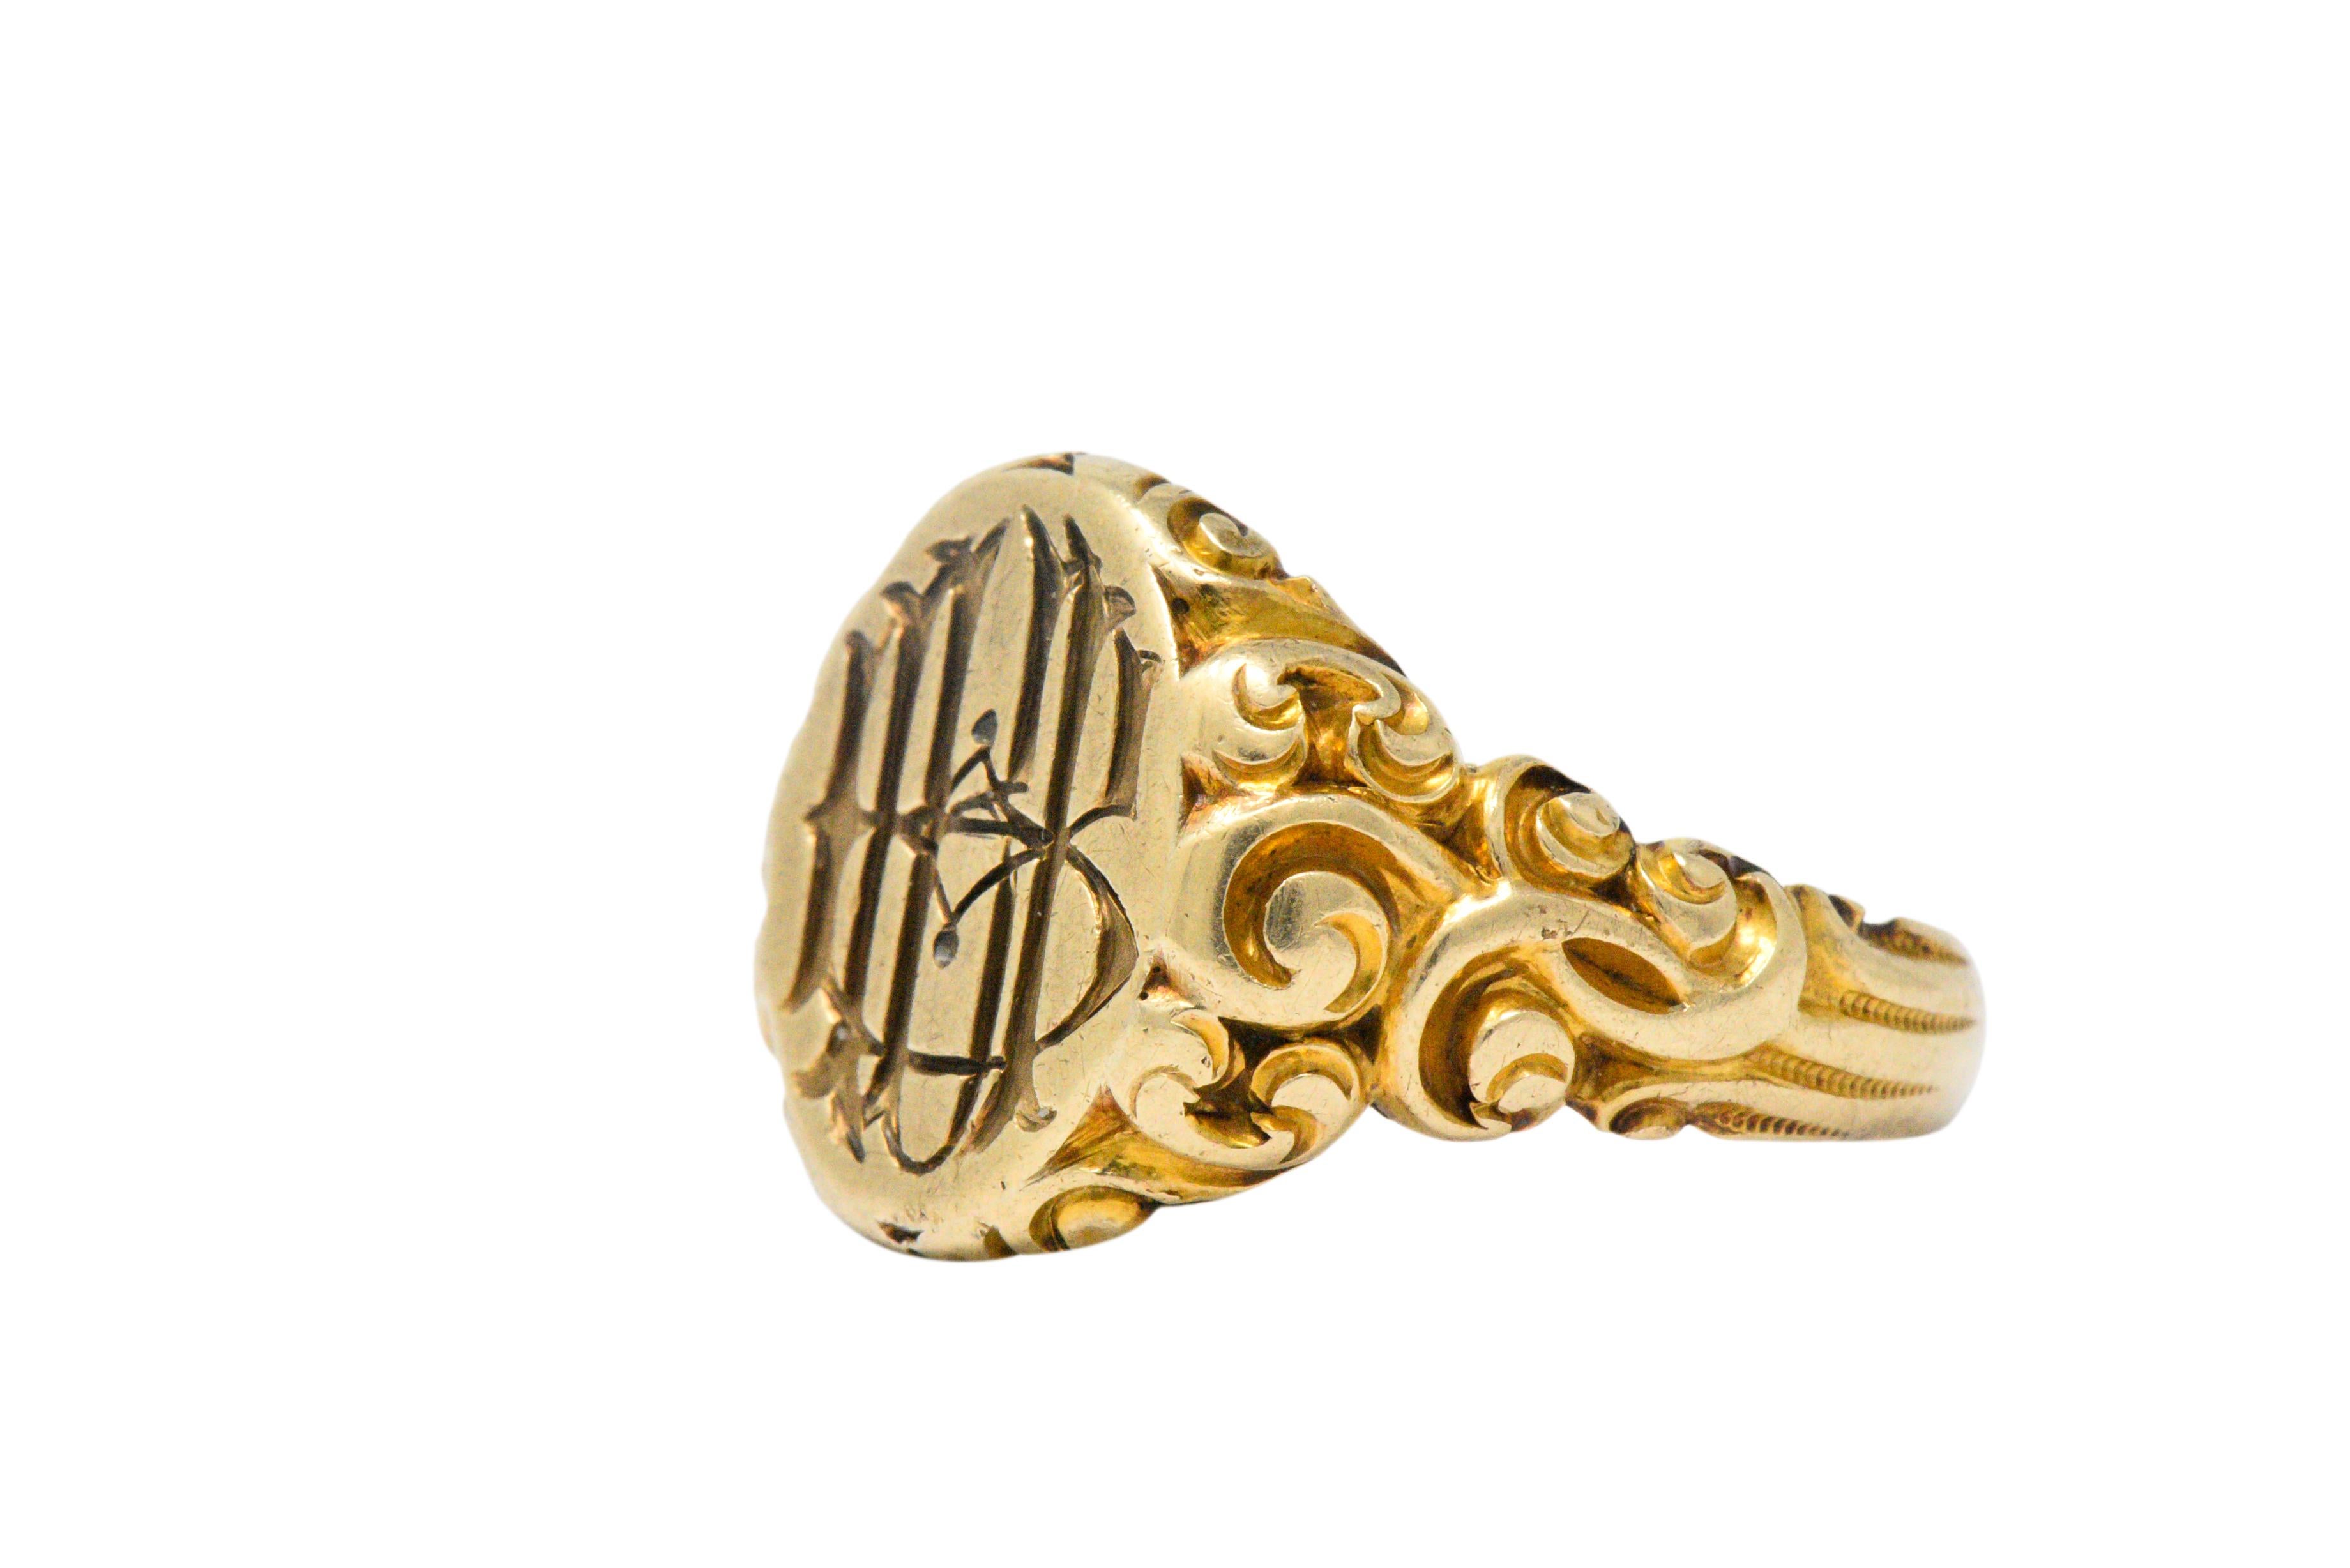 With a deep intricate carved monogram of interlocking letters

With stunning highly detailed scrolling gold work on each side and going part-way down the shank

The history of signet rings dates back to 3500 BCE, and have been worn by Pharaohs,